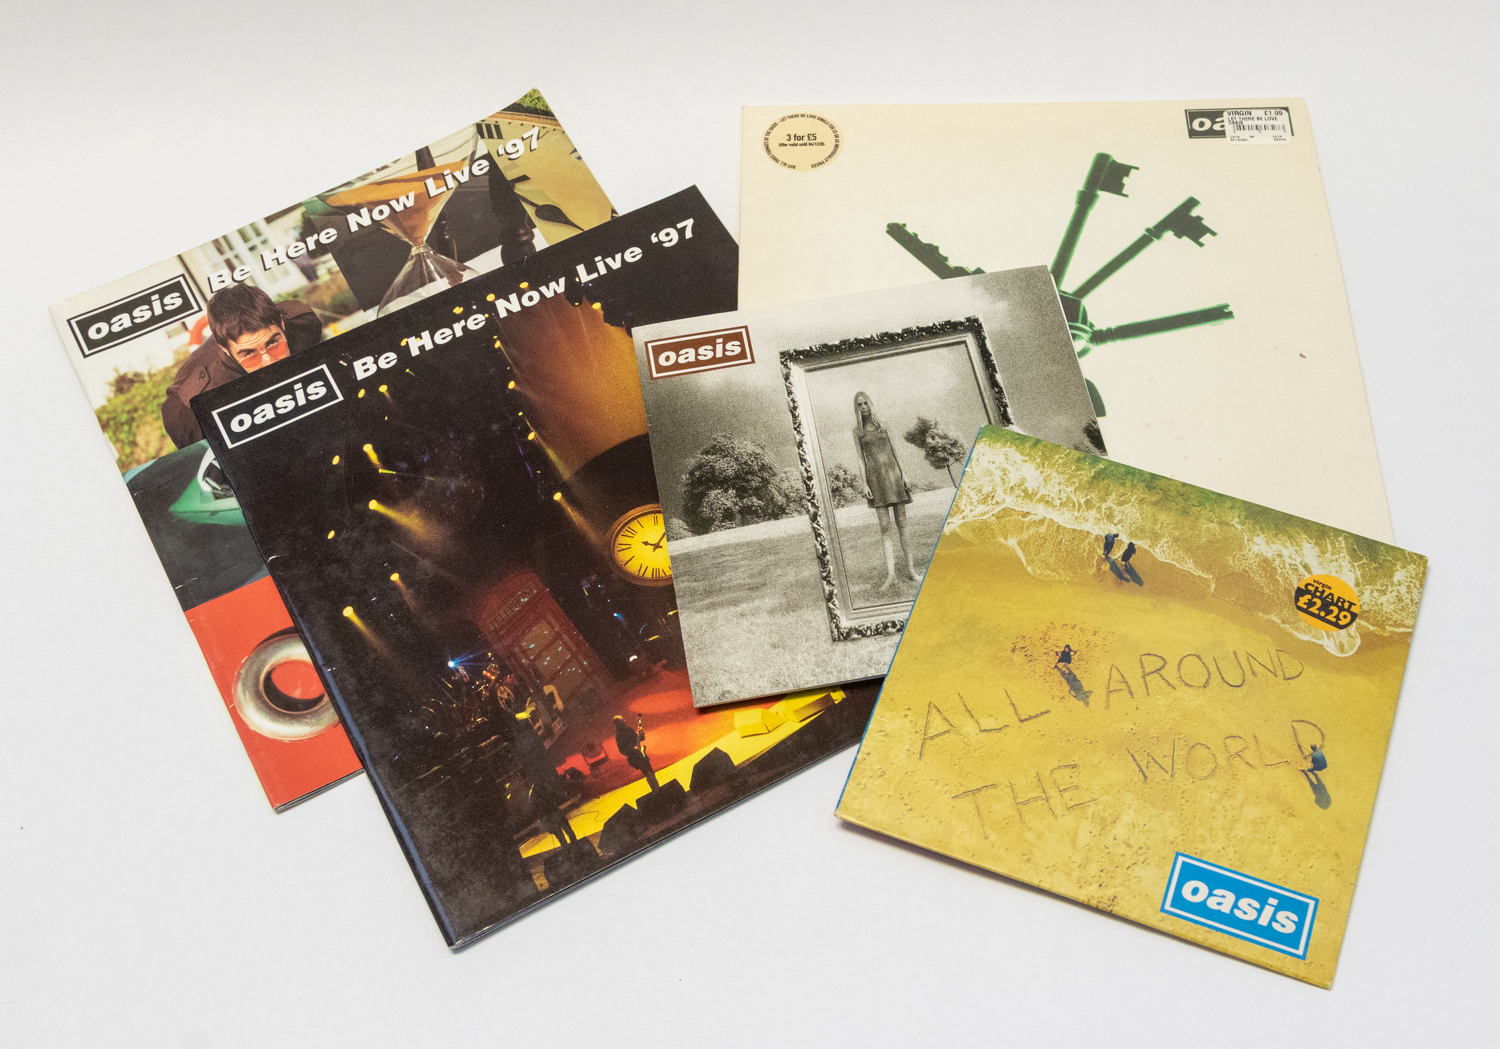 Oasis - small collection including 2 x 1997 Tour Programmes, 7 inch All around the world - 7 inch